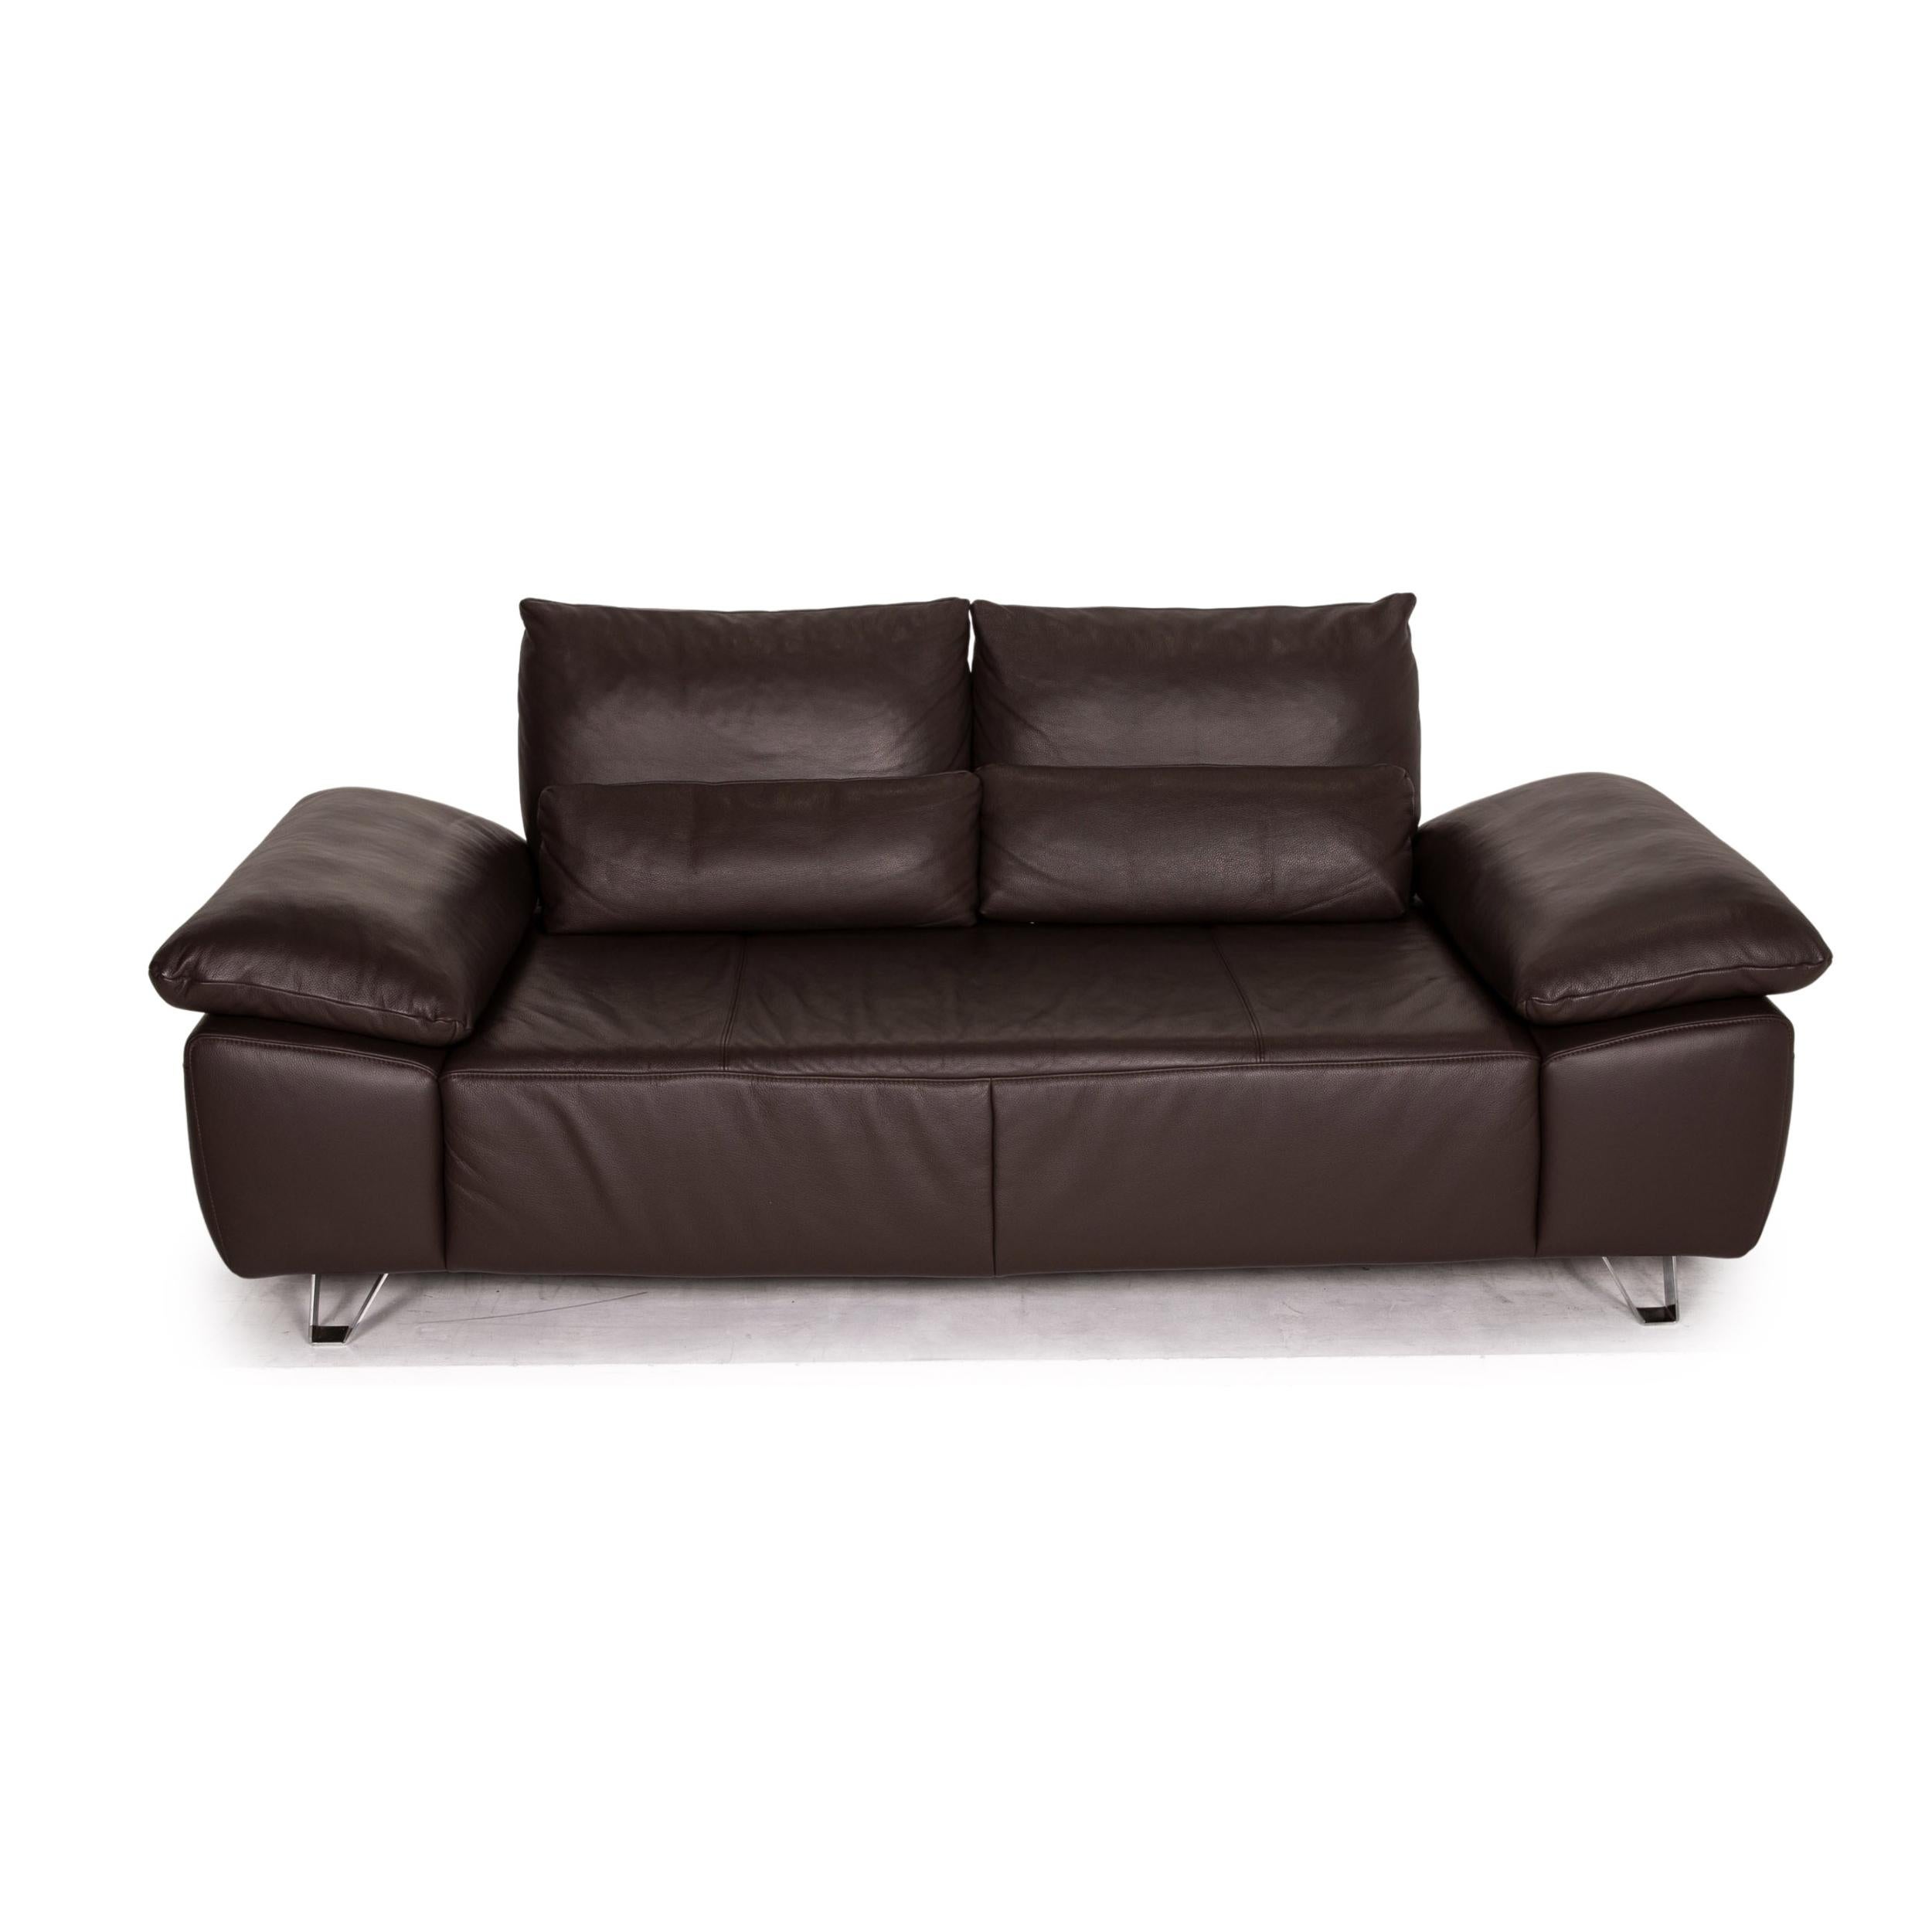 Musterring MR 680 Two-Seater Sofa Brown Leather Couch Function 2